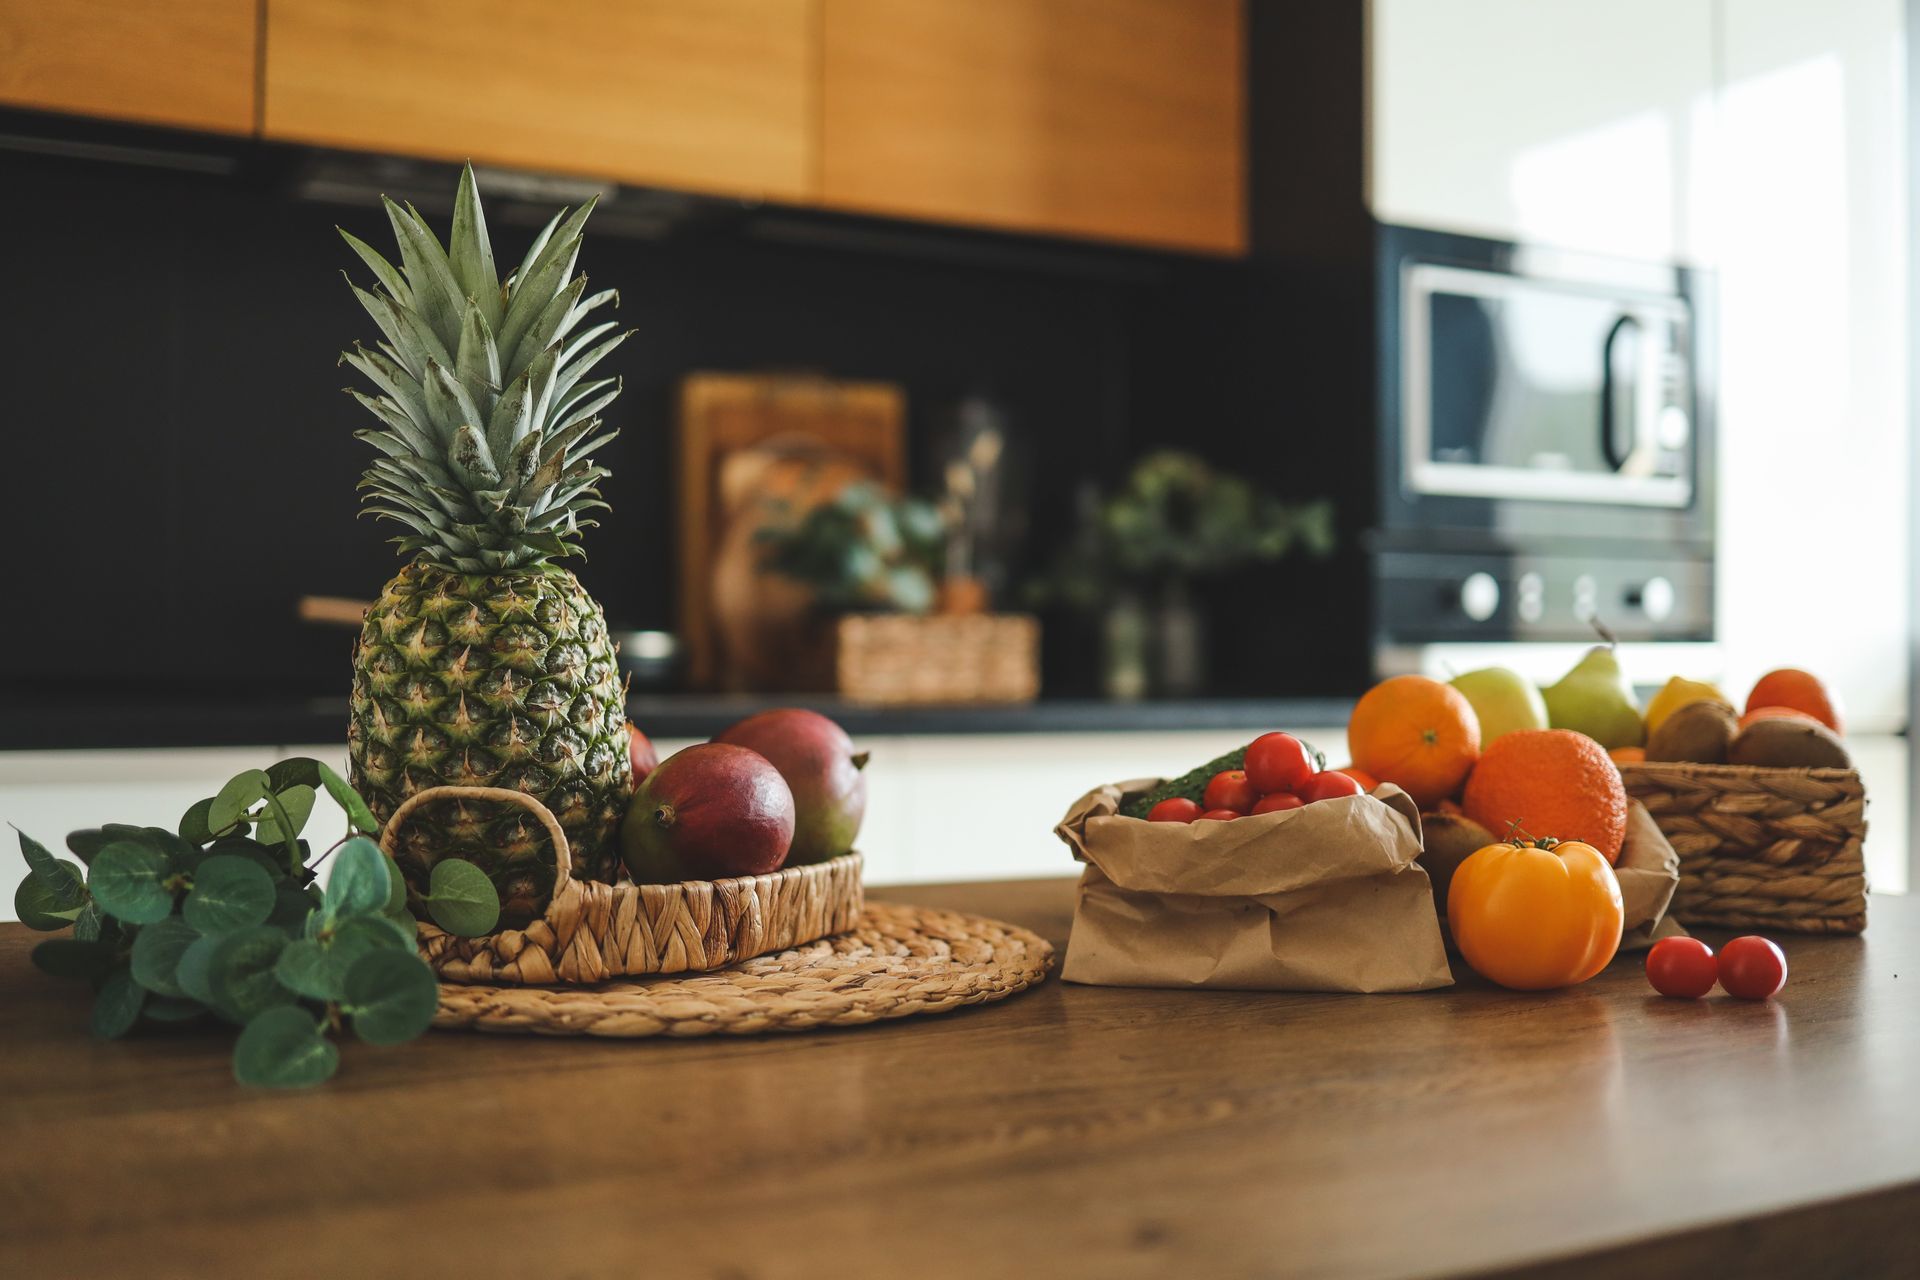 A pineapple is sitting on a wooden table next to a basket of fruit.